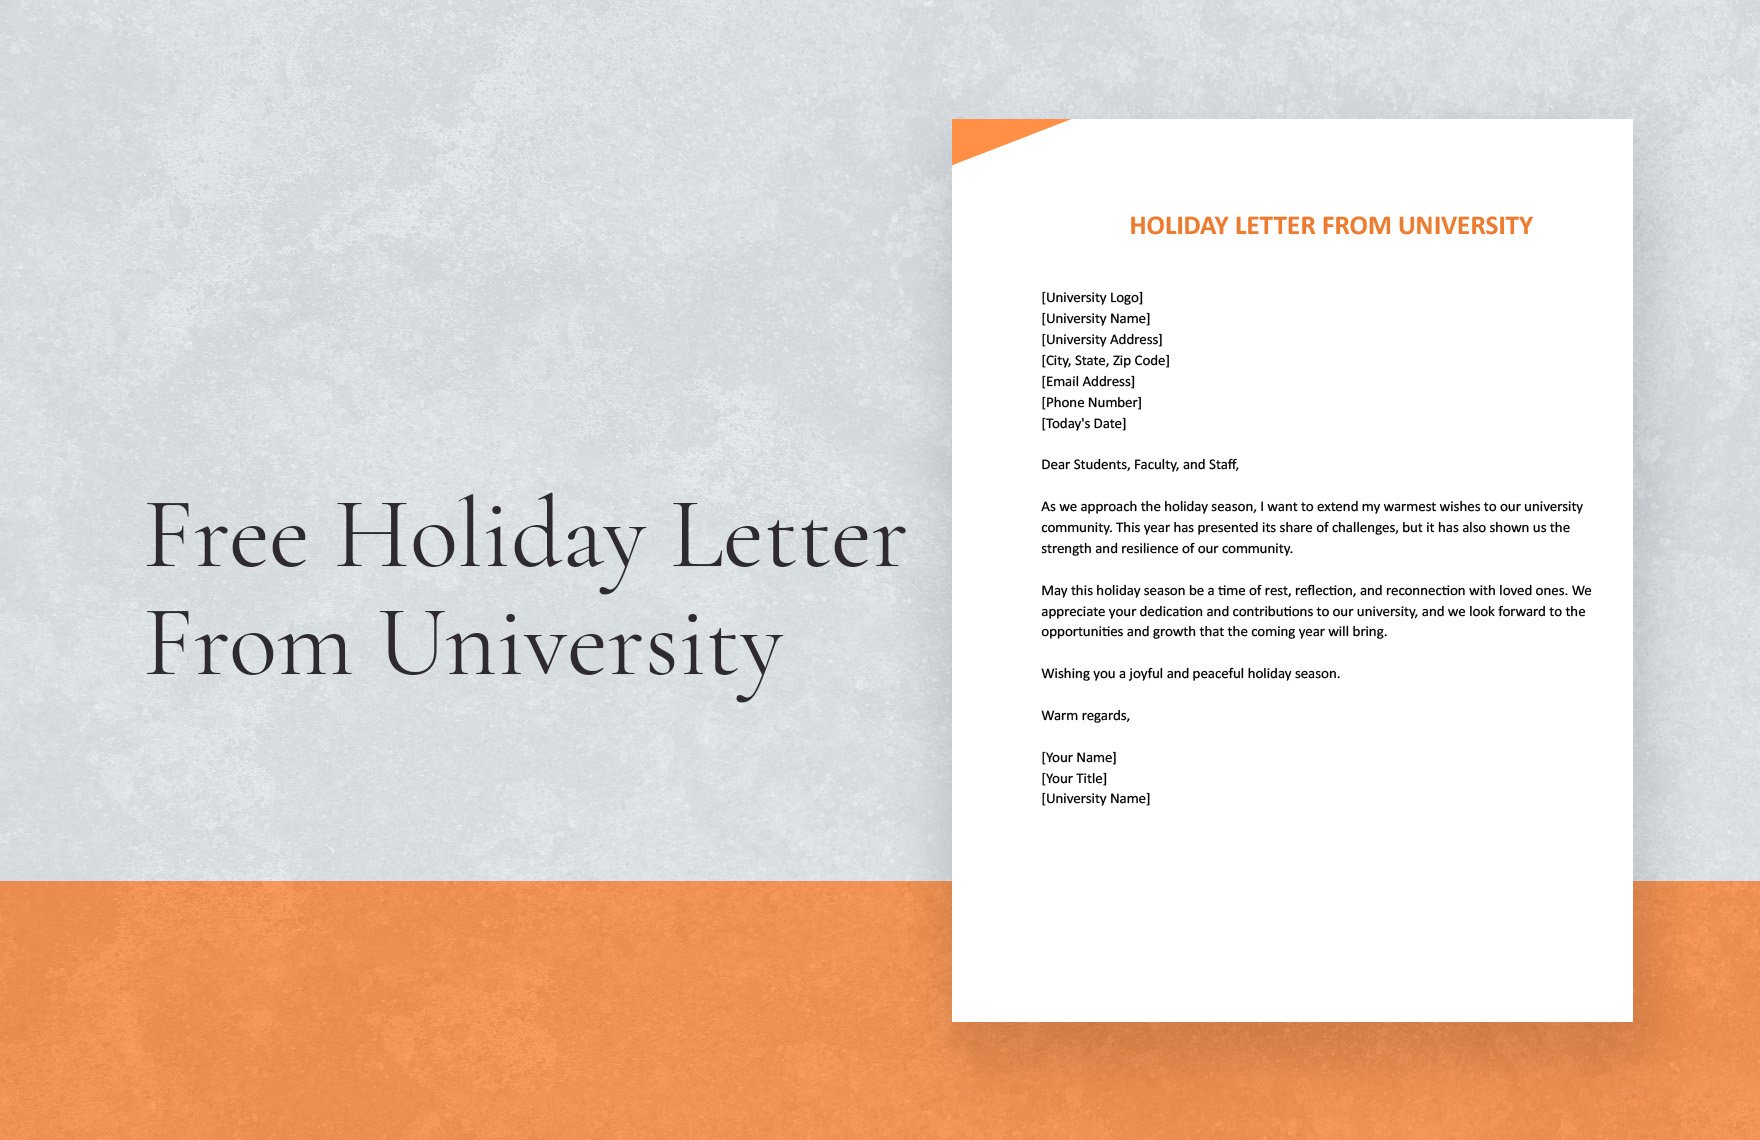 Holiday Letter From University